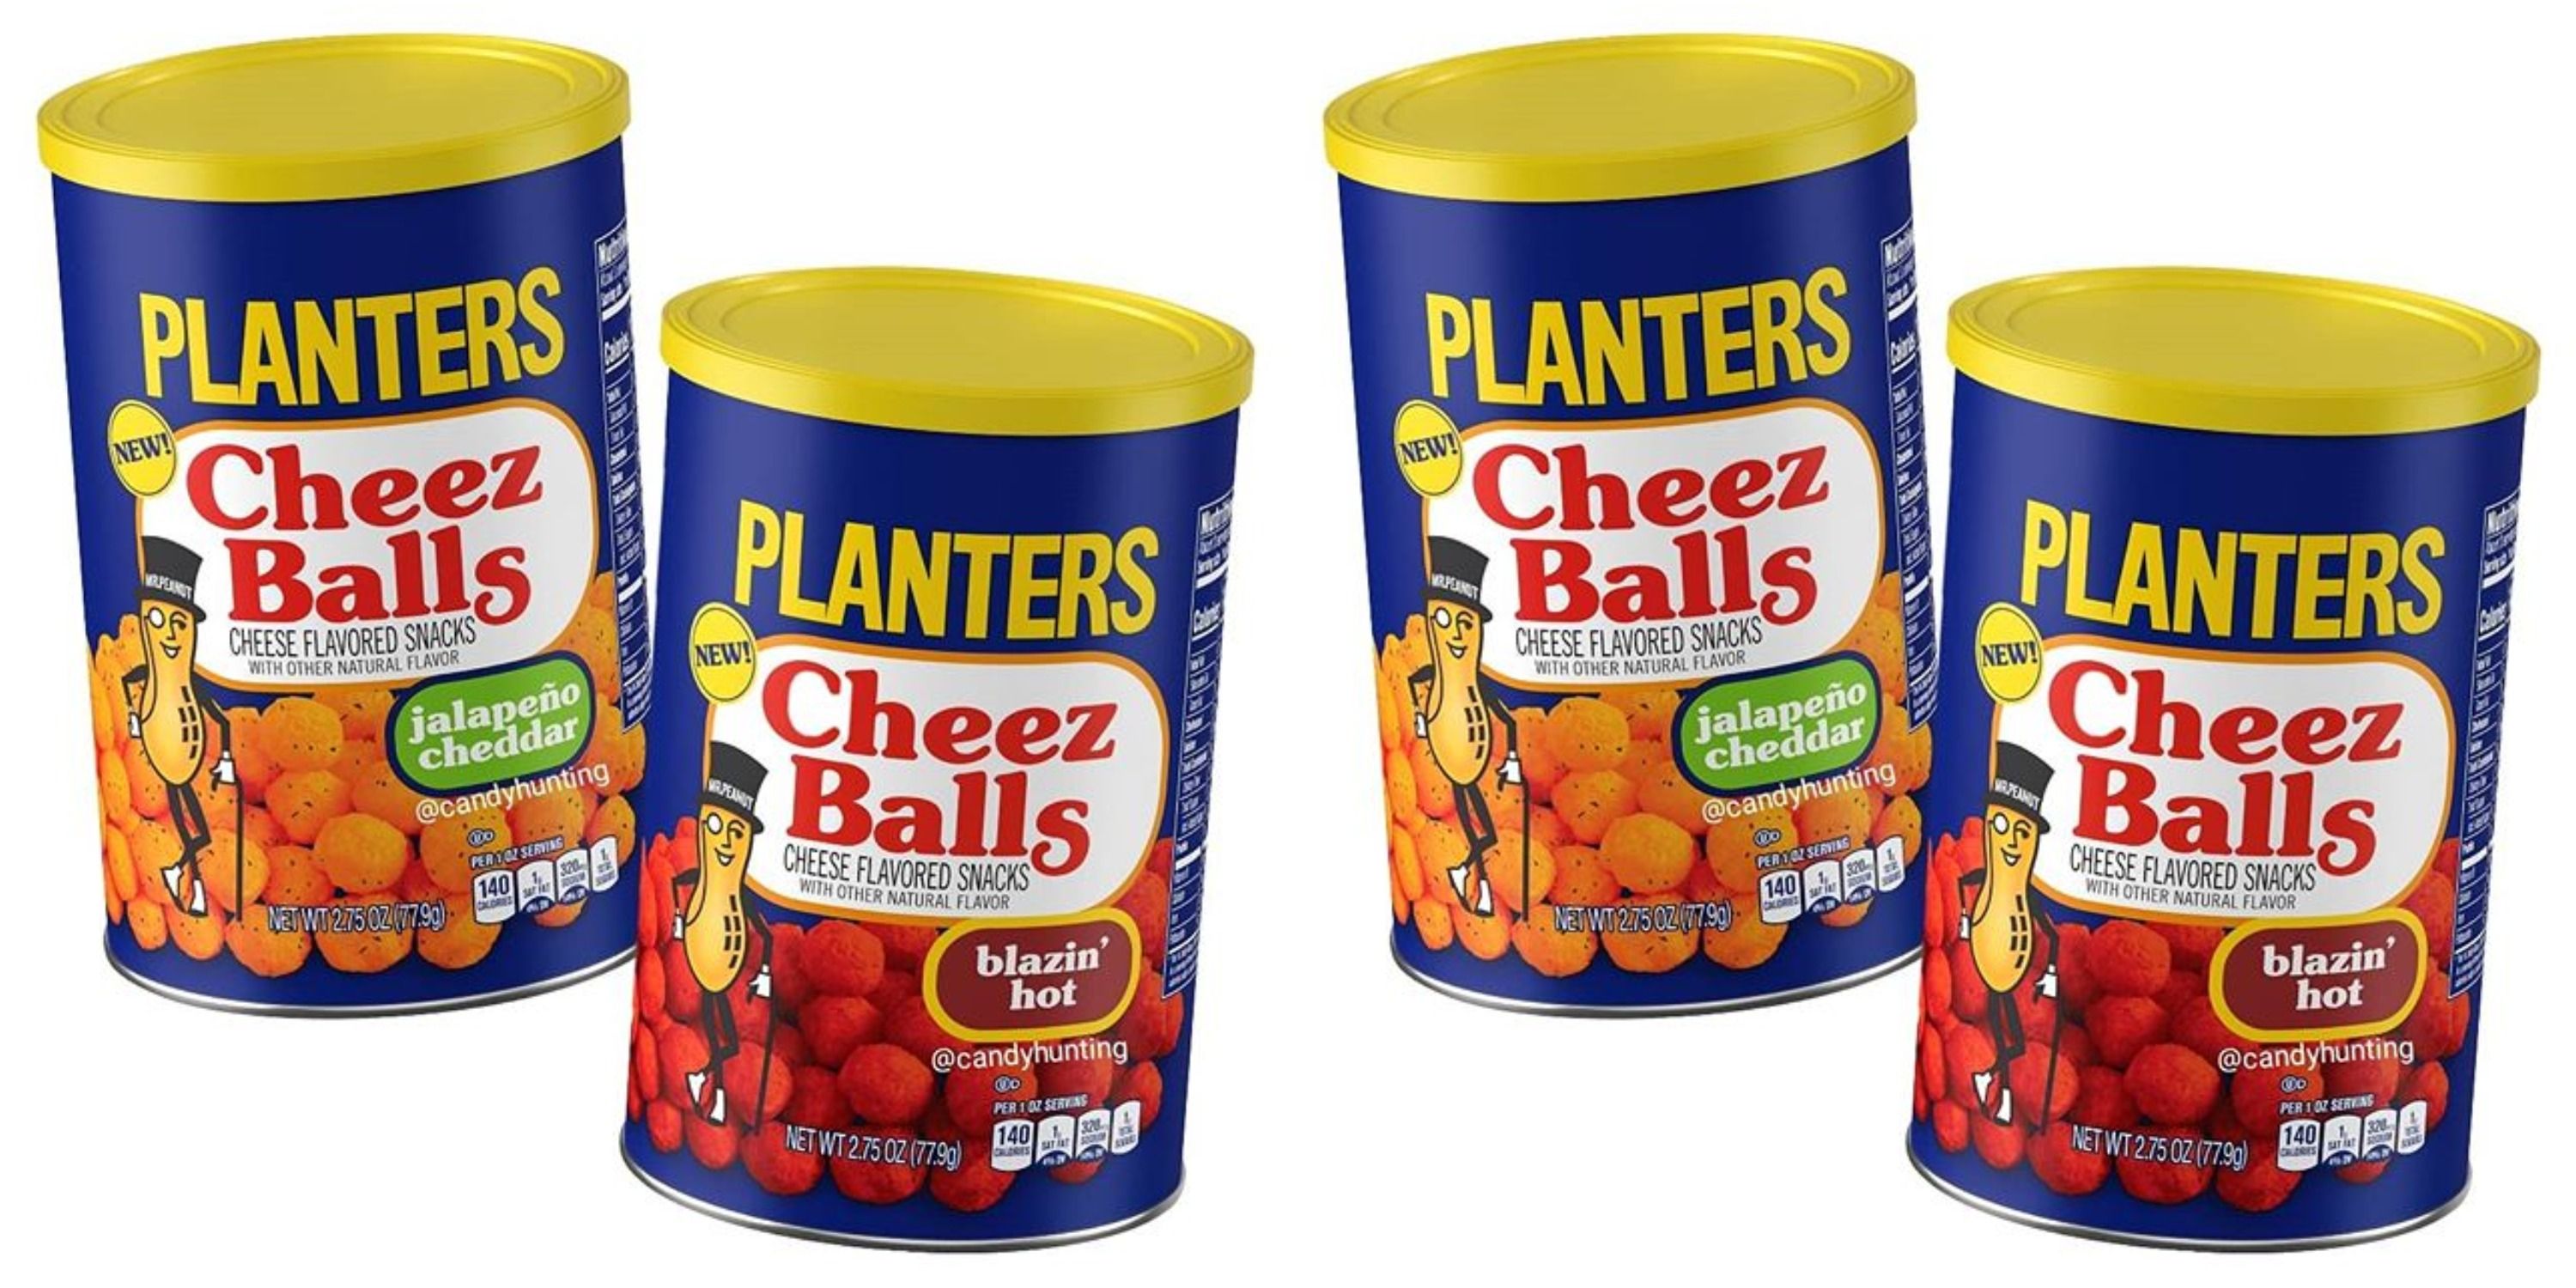 Planters Is Making 4 New Flavors Of Cheez Balls Including Blazin